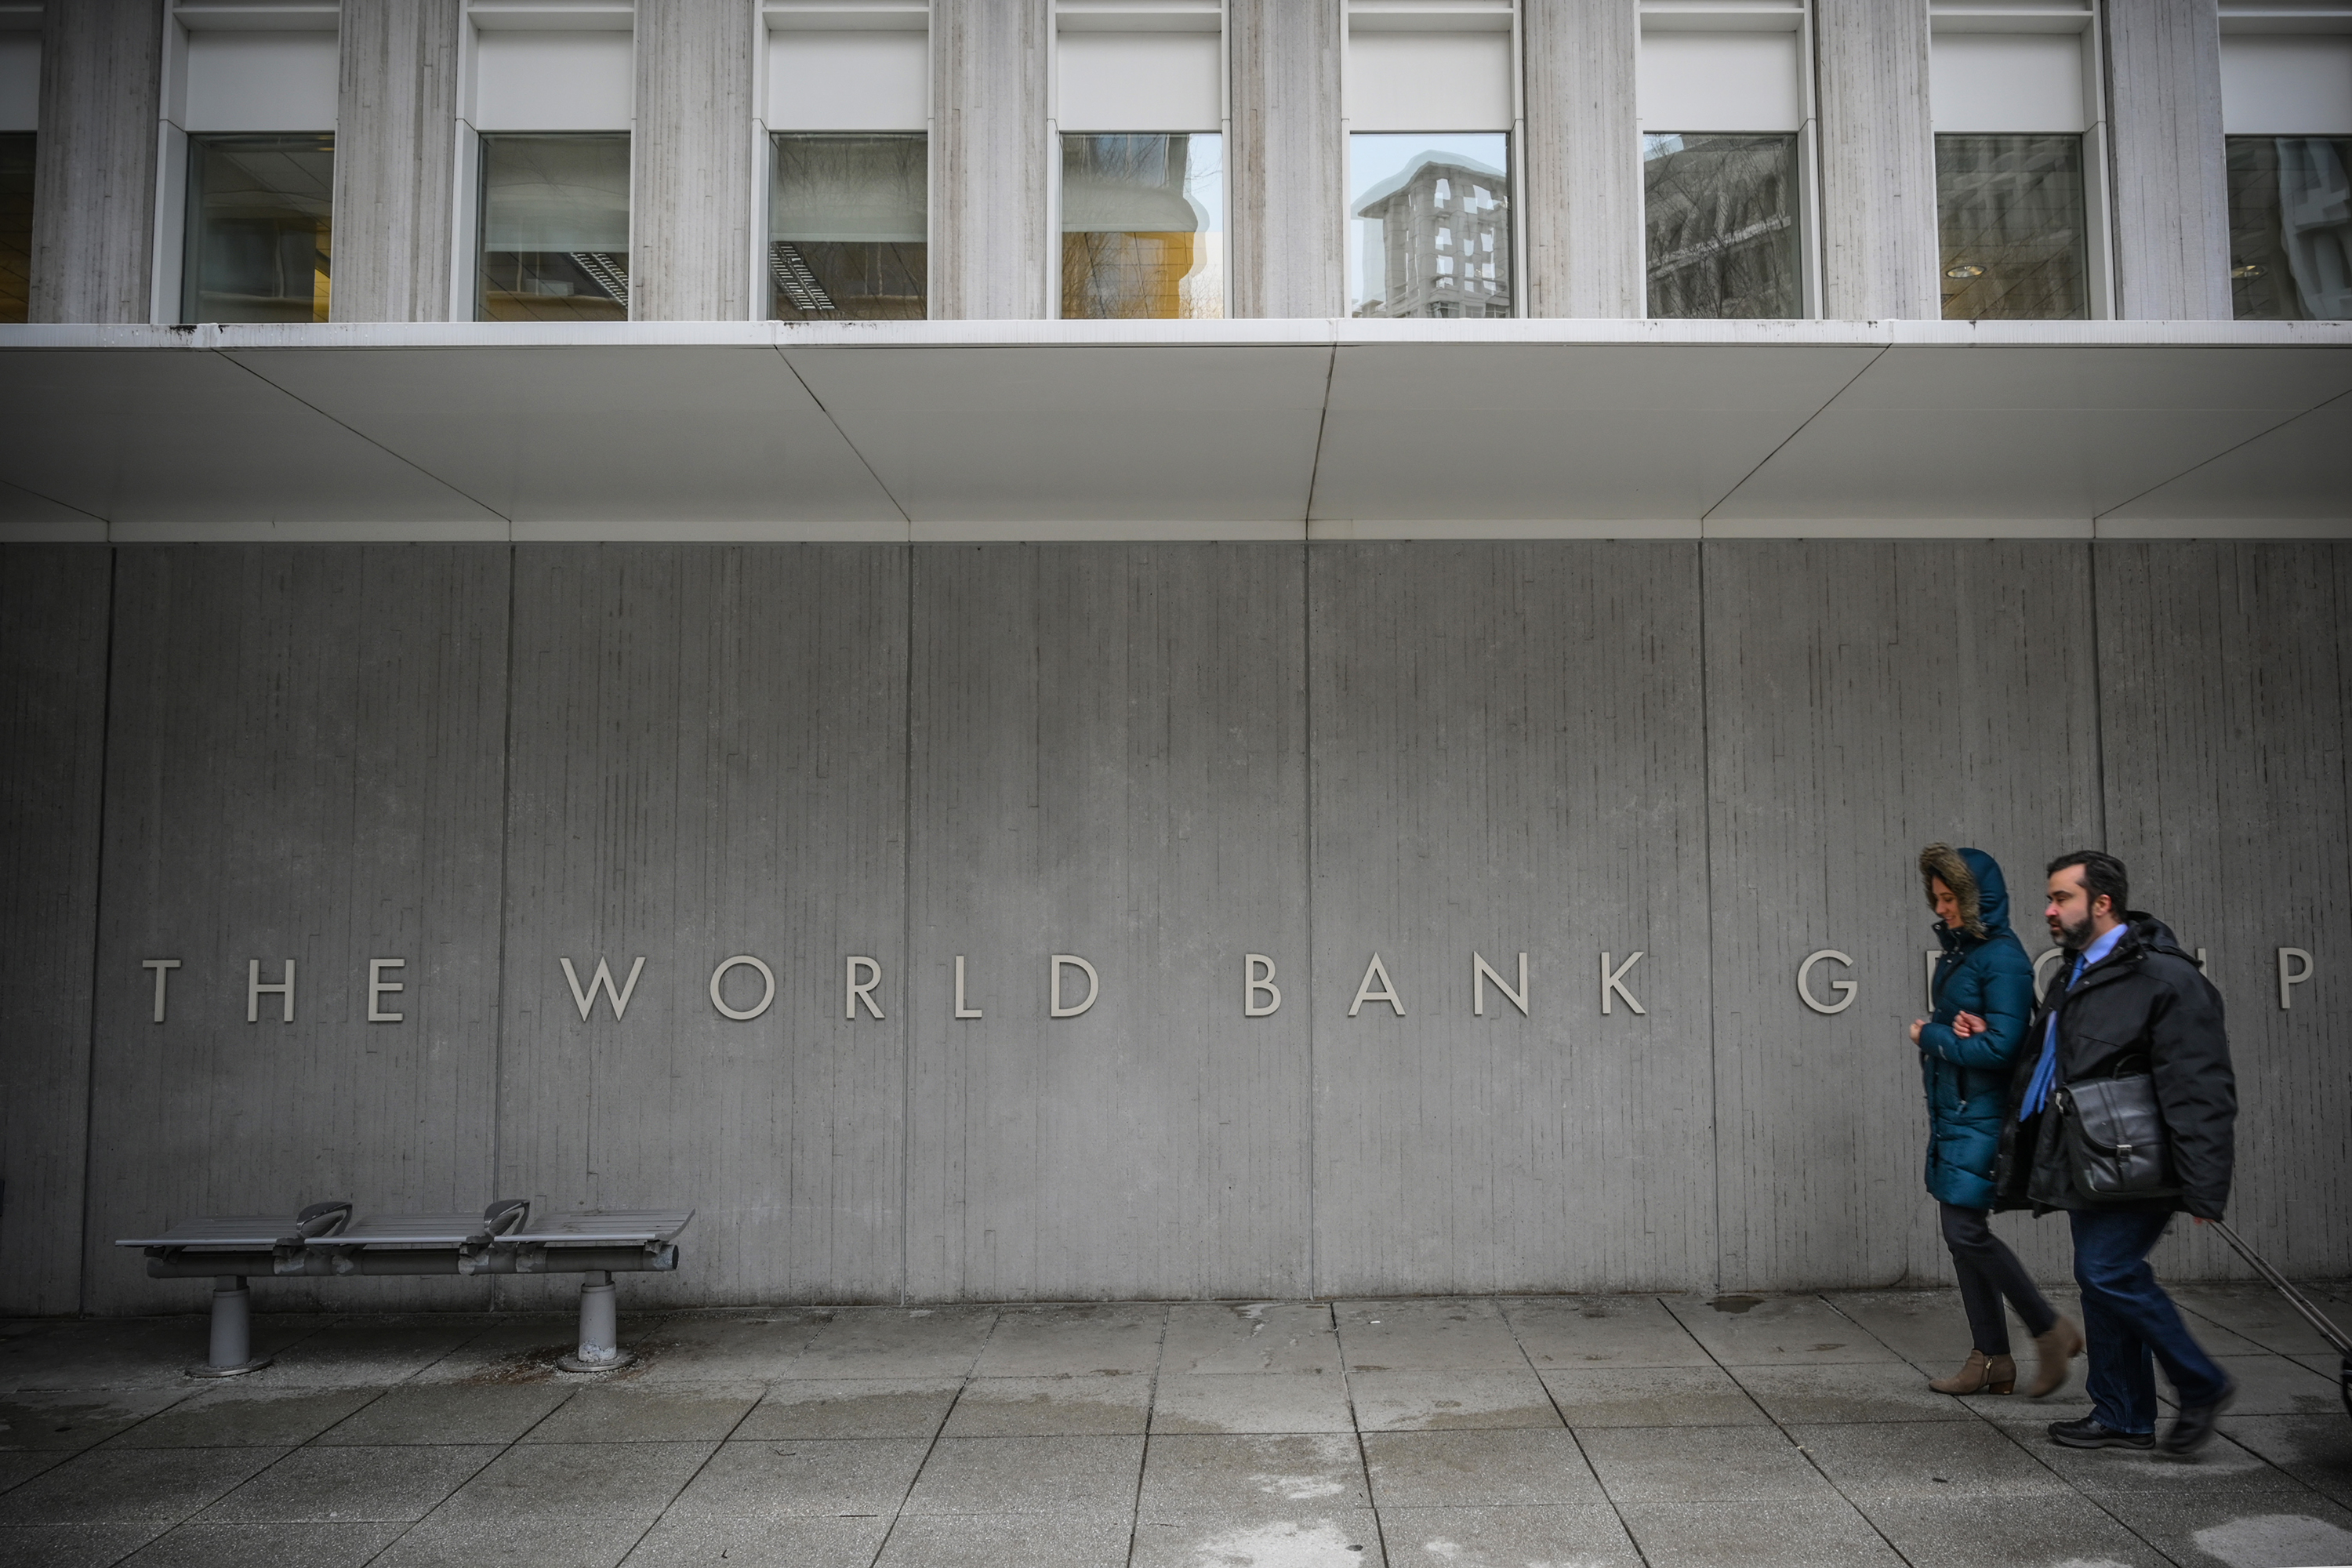 The building of World Bank Group is seen in Washington, DC.